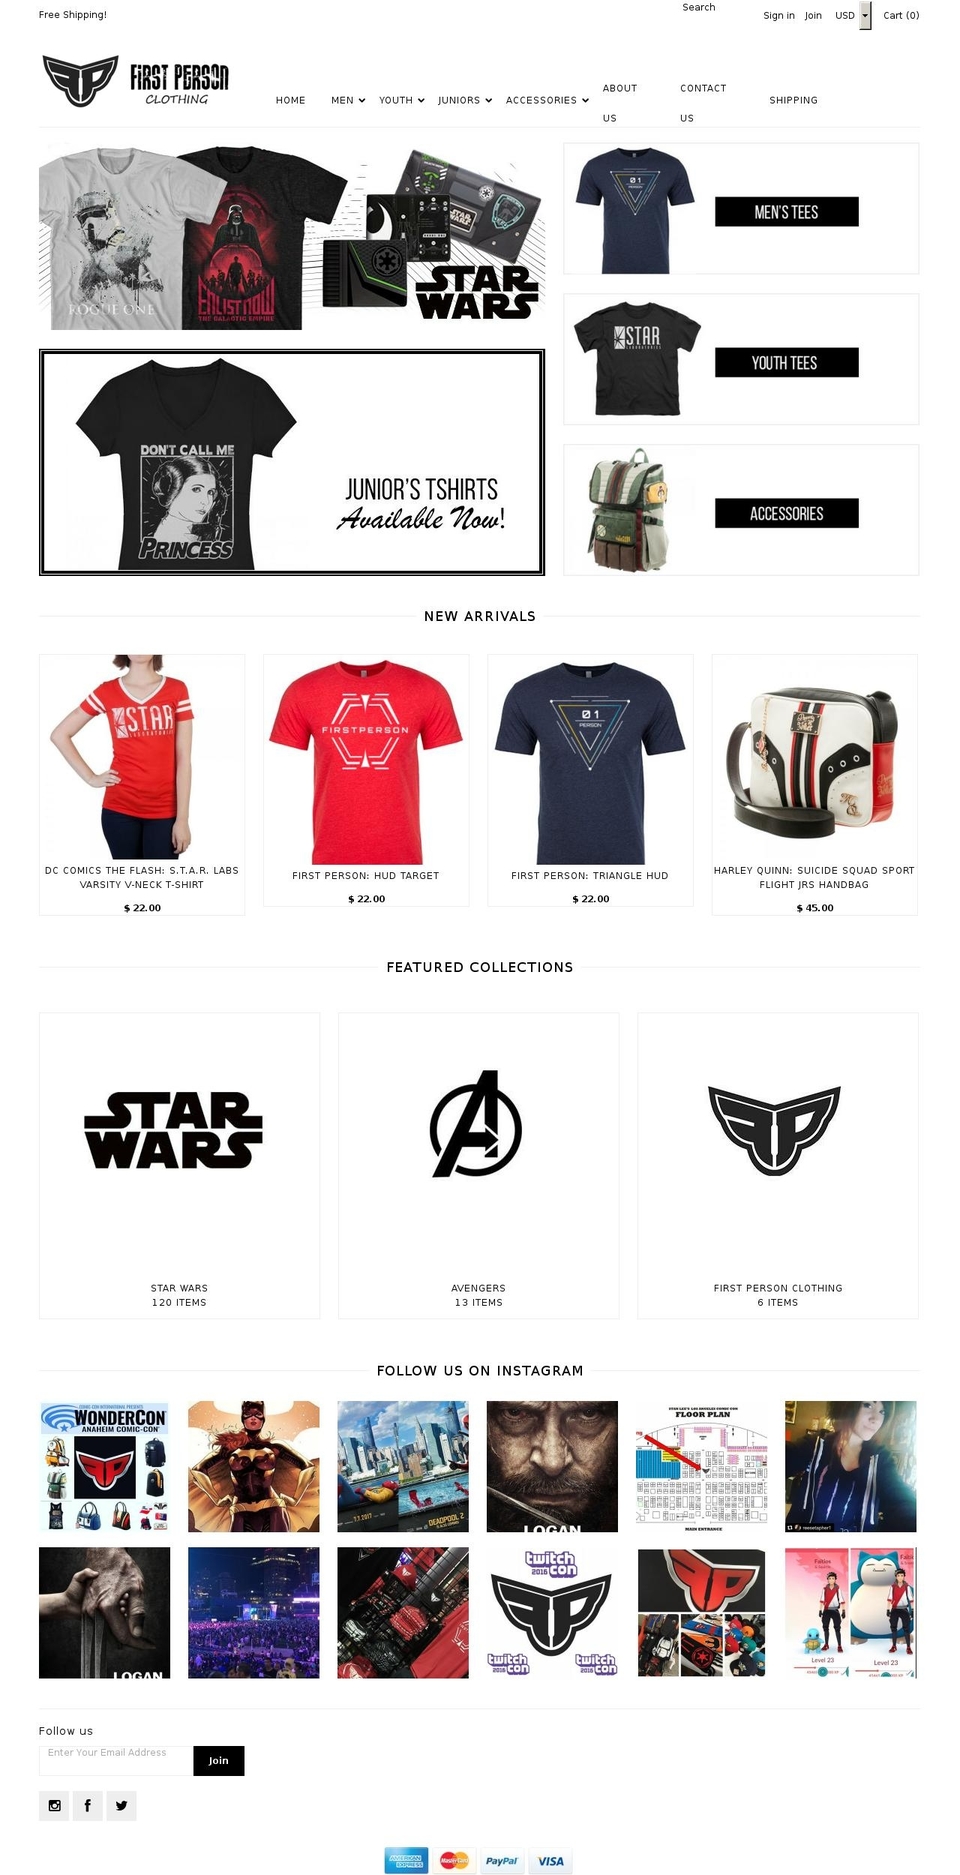 Mr Parker Shopify theme site example firstpersonclothing.com